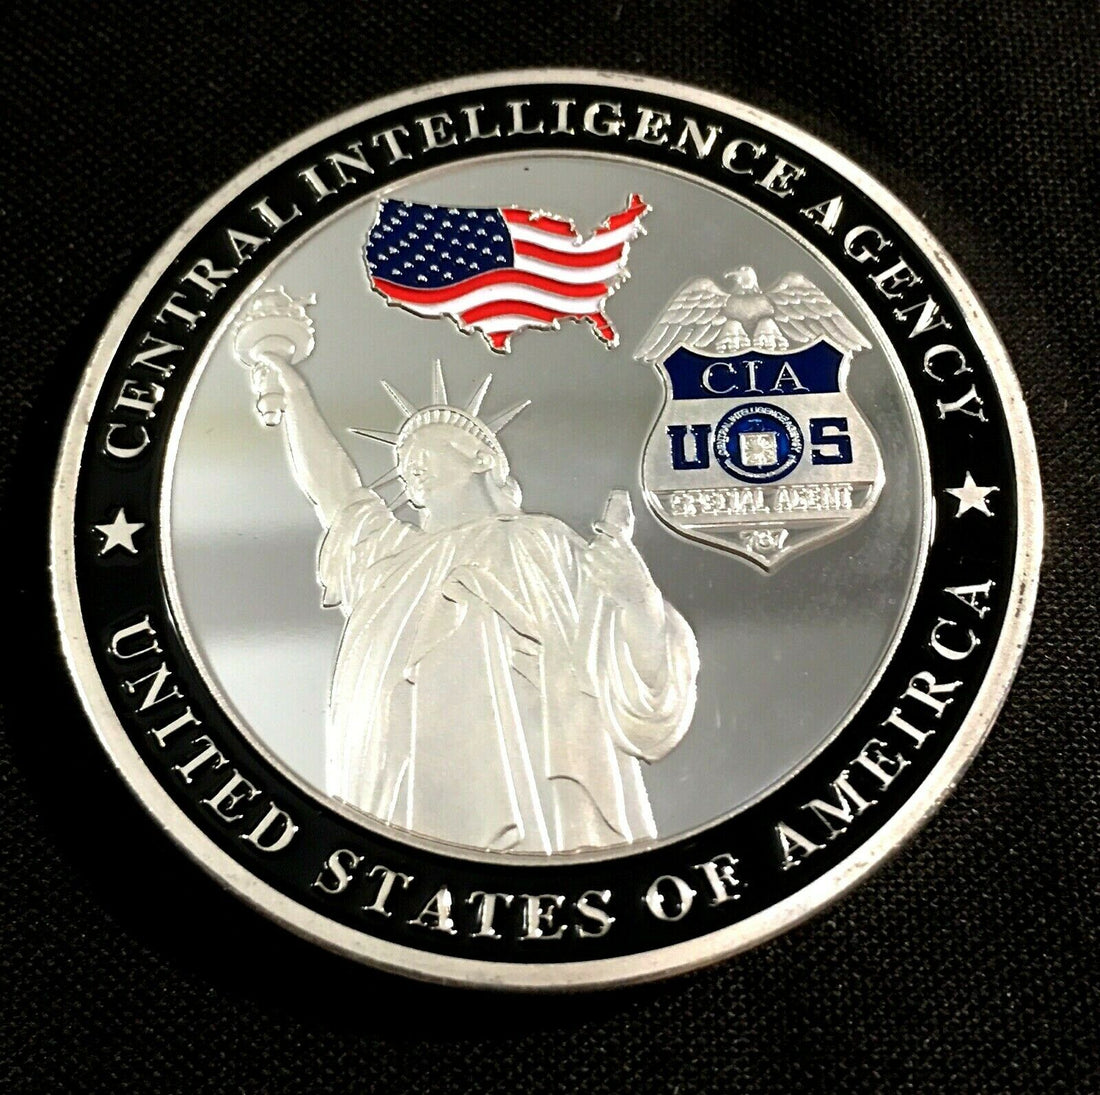 CIA United States Central Intelligence Agency Liberty EGL Challenge Coin 45mm